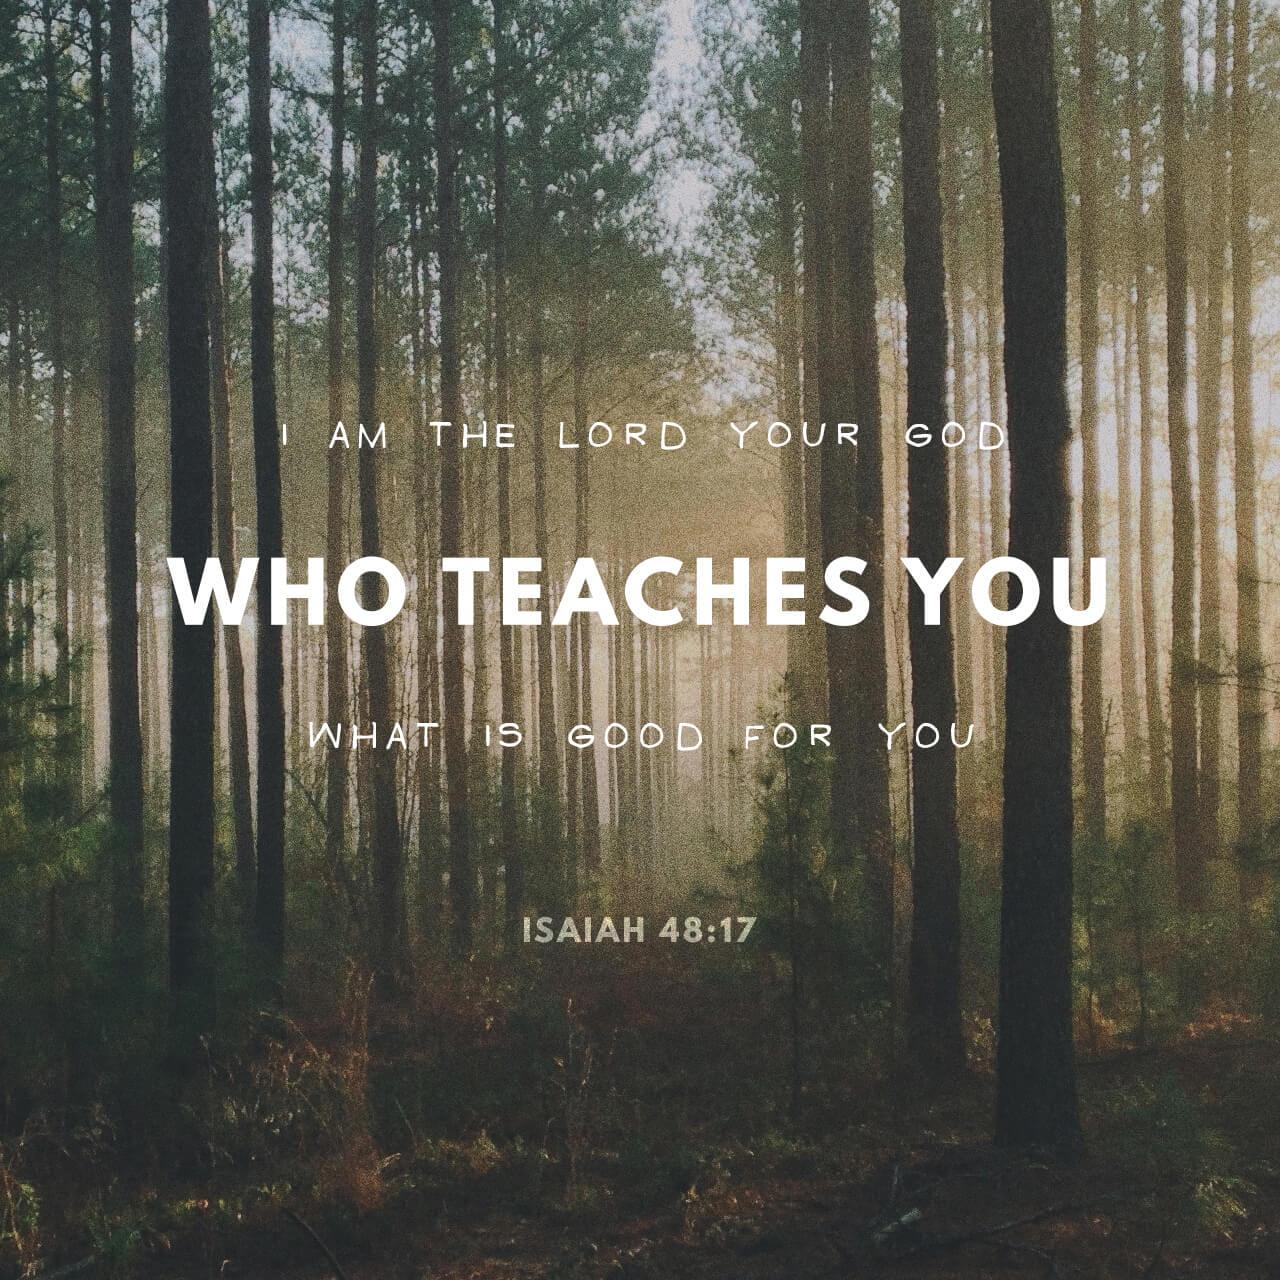 Bible Verse of the Day - day 90 - image 578 (Isaiah 48:17-18)